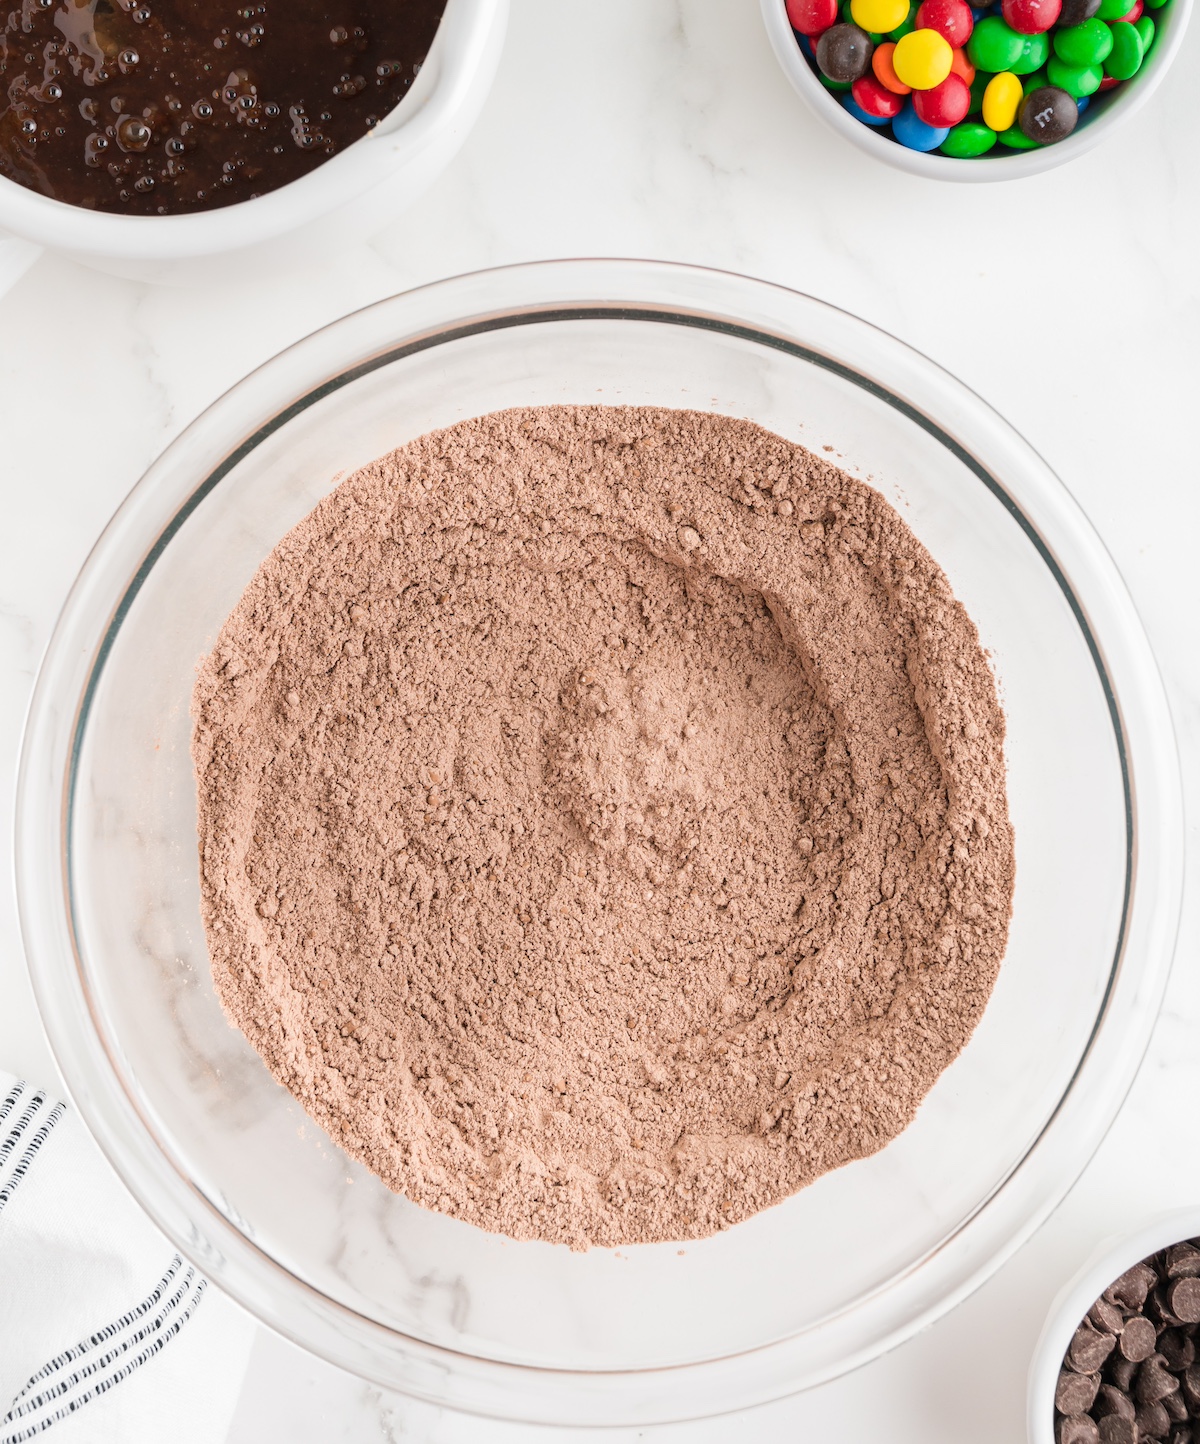 Cocoa powder, flour, salt, and baking powder whisked together in the bowl